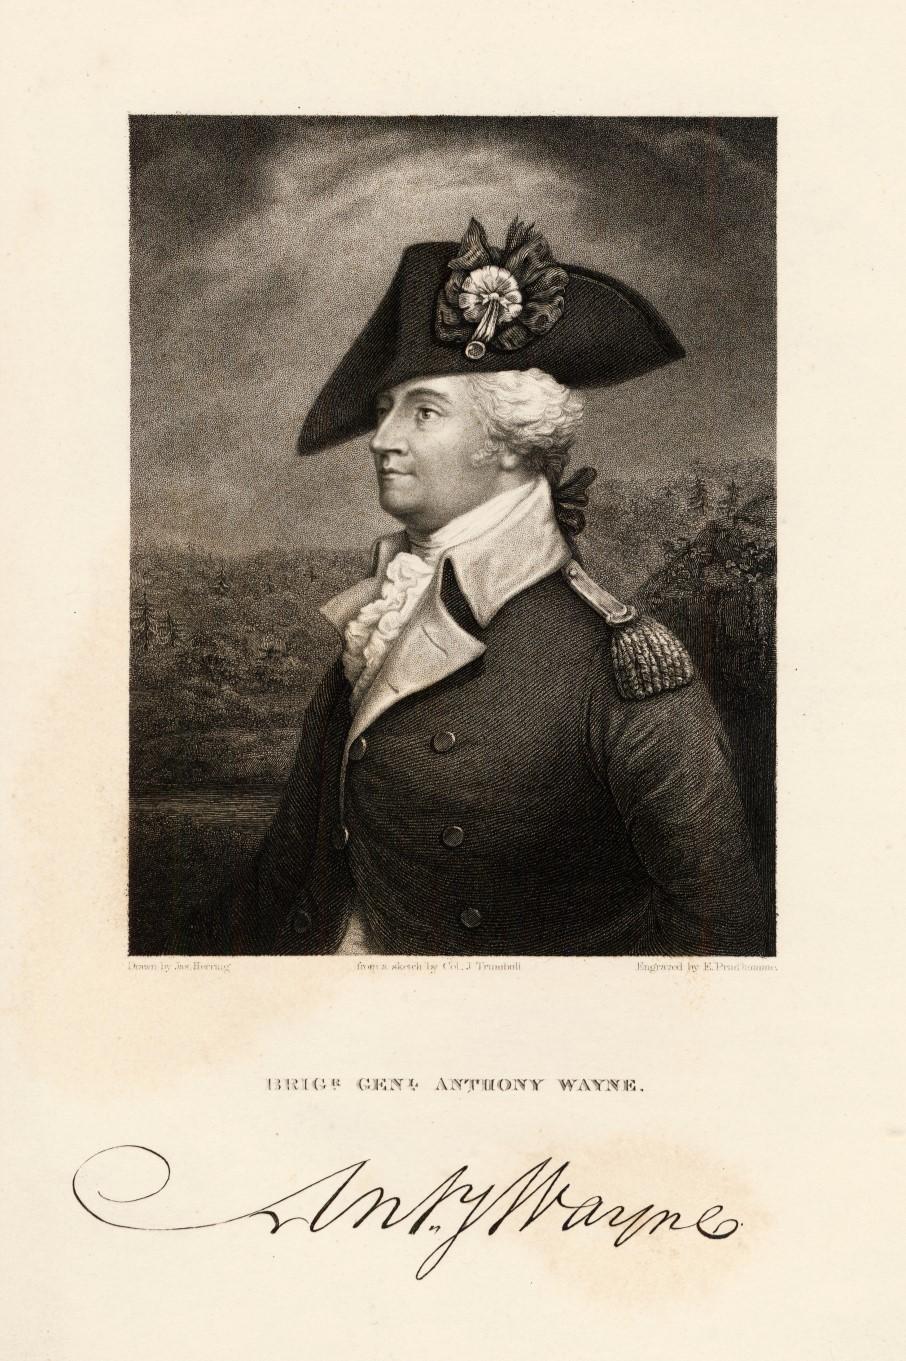 Fifteenth Annual Fort Ticonderoga Seminar on the American Revolution Fort Ticonderoga, September 21-23, 2018 Brig r. Gen l. Anthony Wayne 19 th -Century Lithograph from an original sketch by Col.